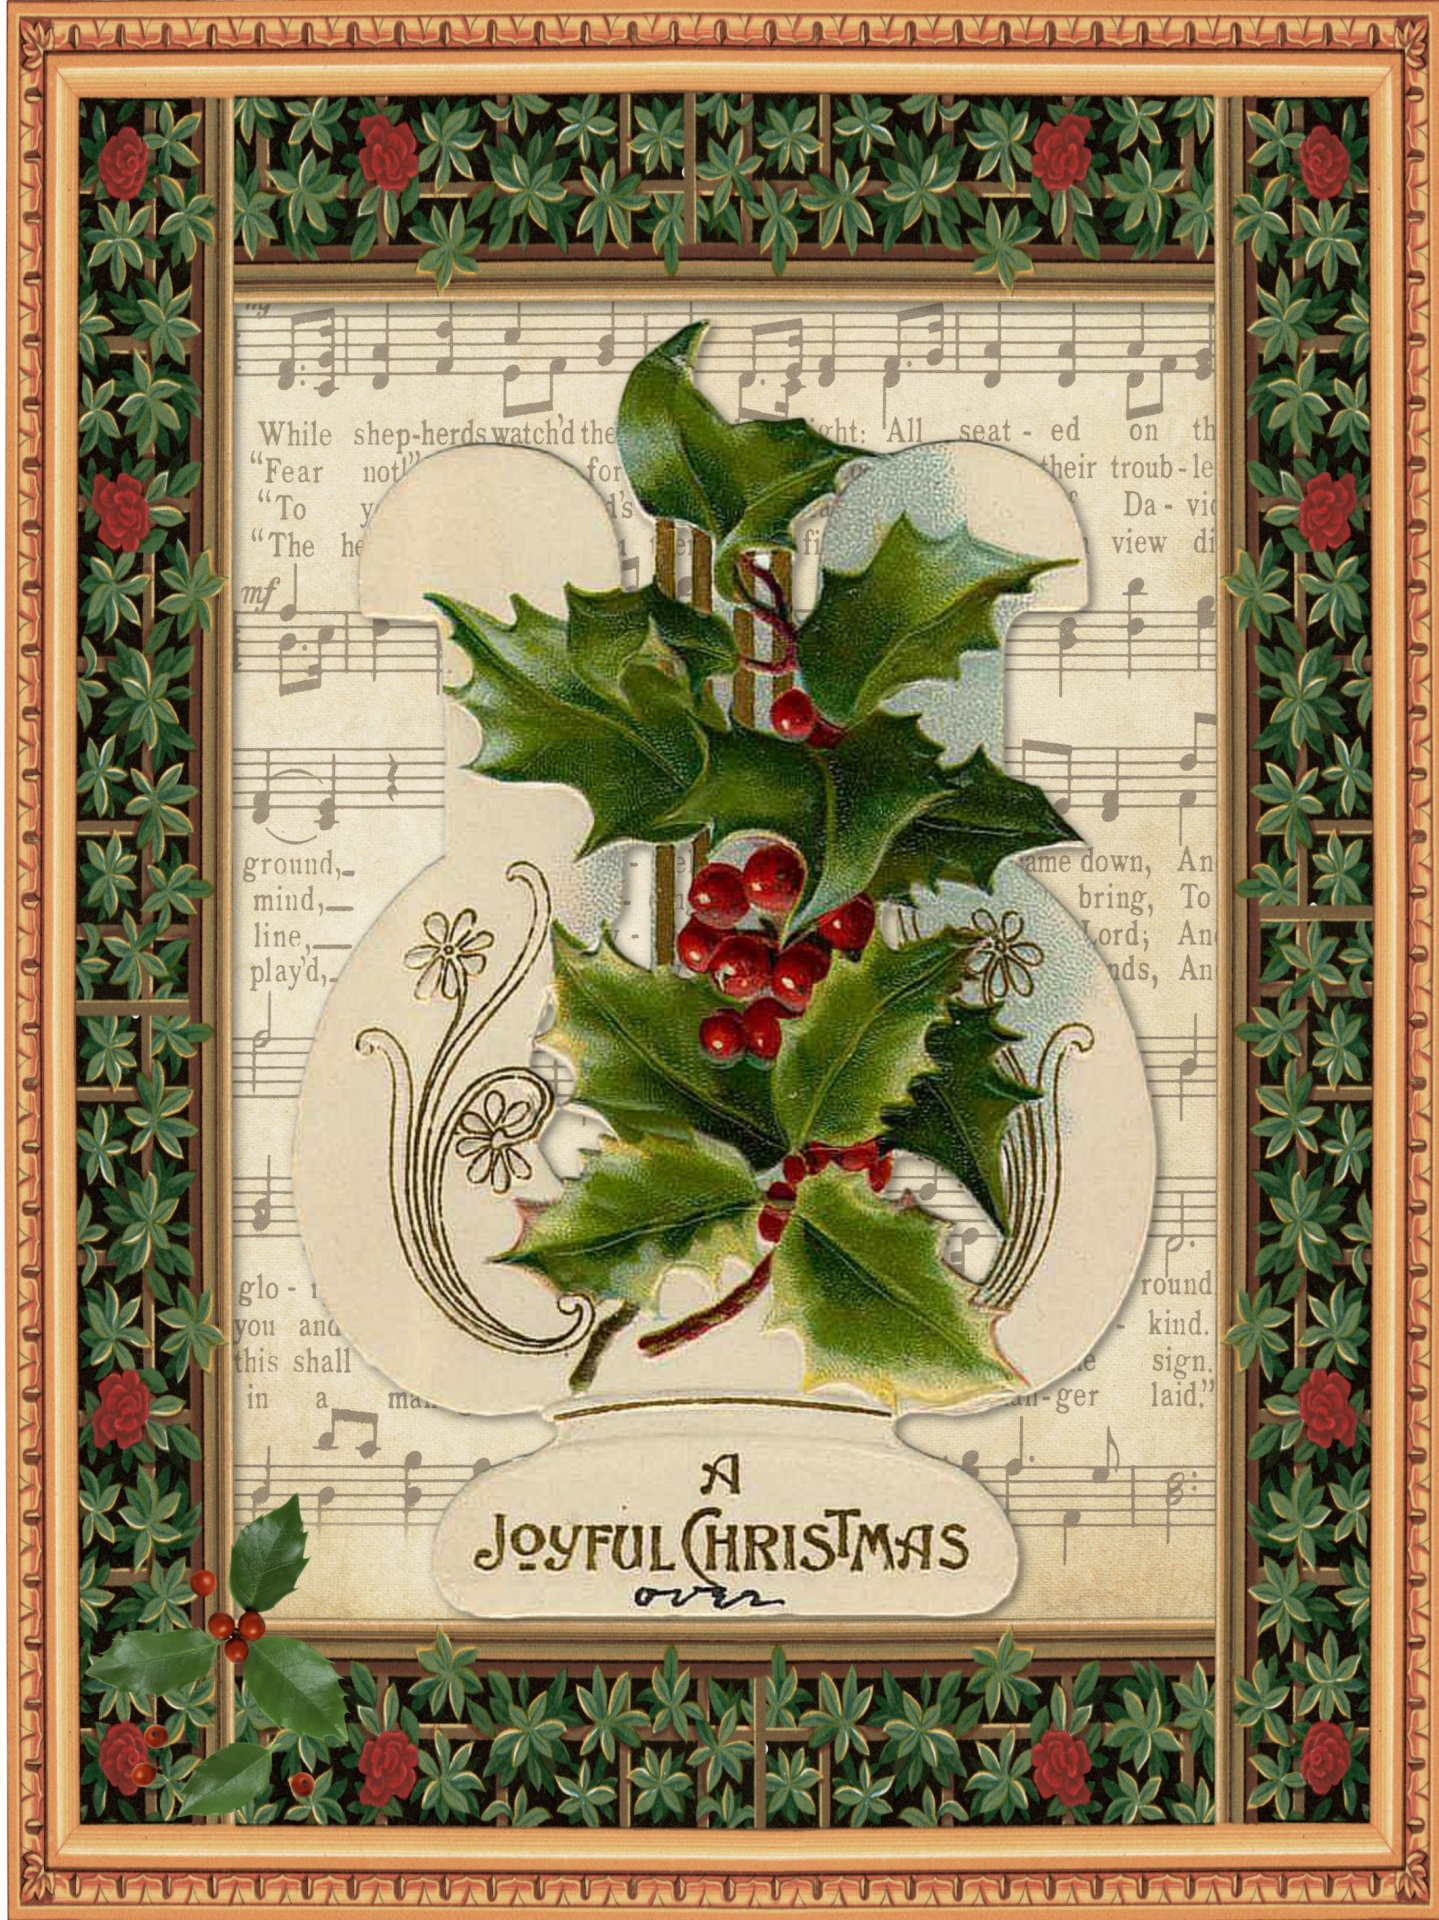 Christmas Greeting Card featuring holly with berries on a harp